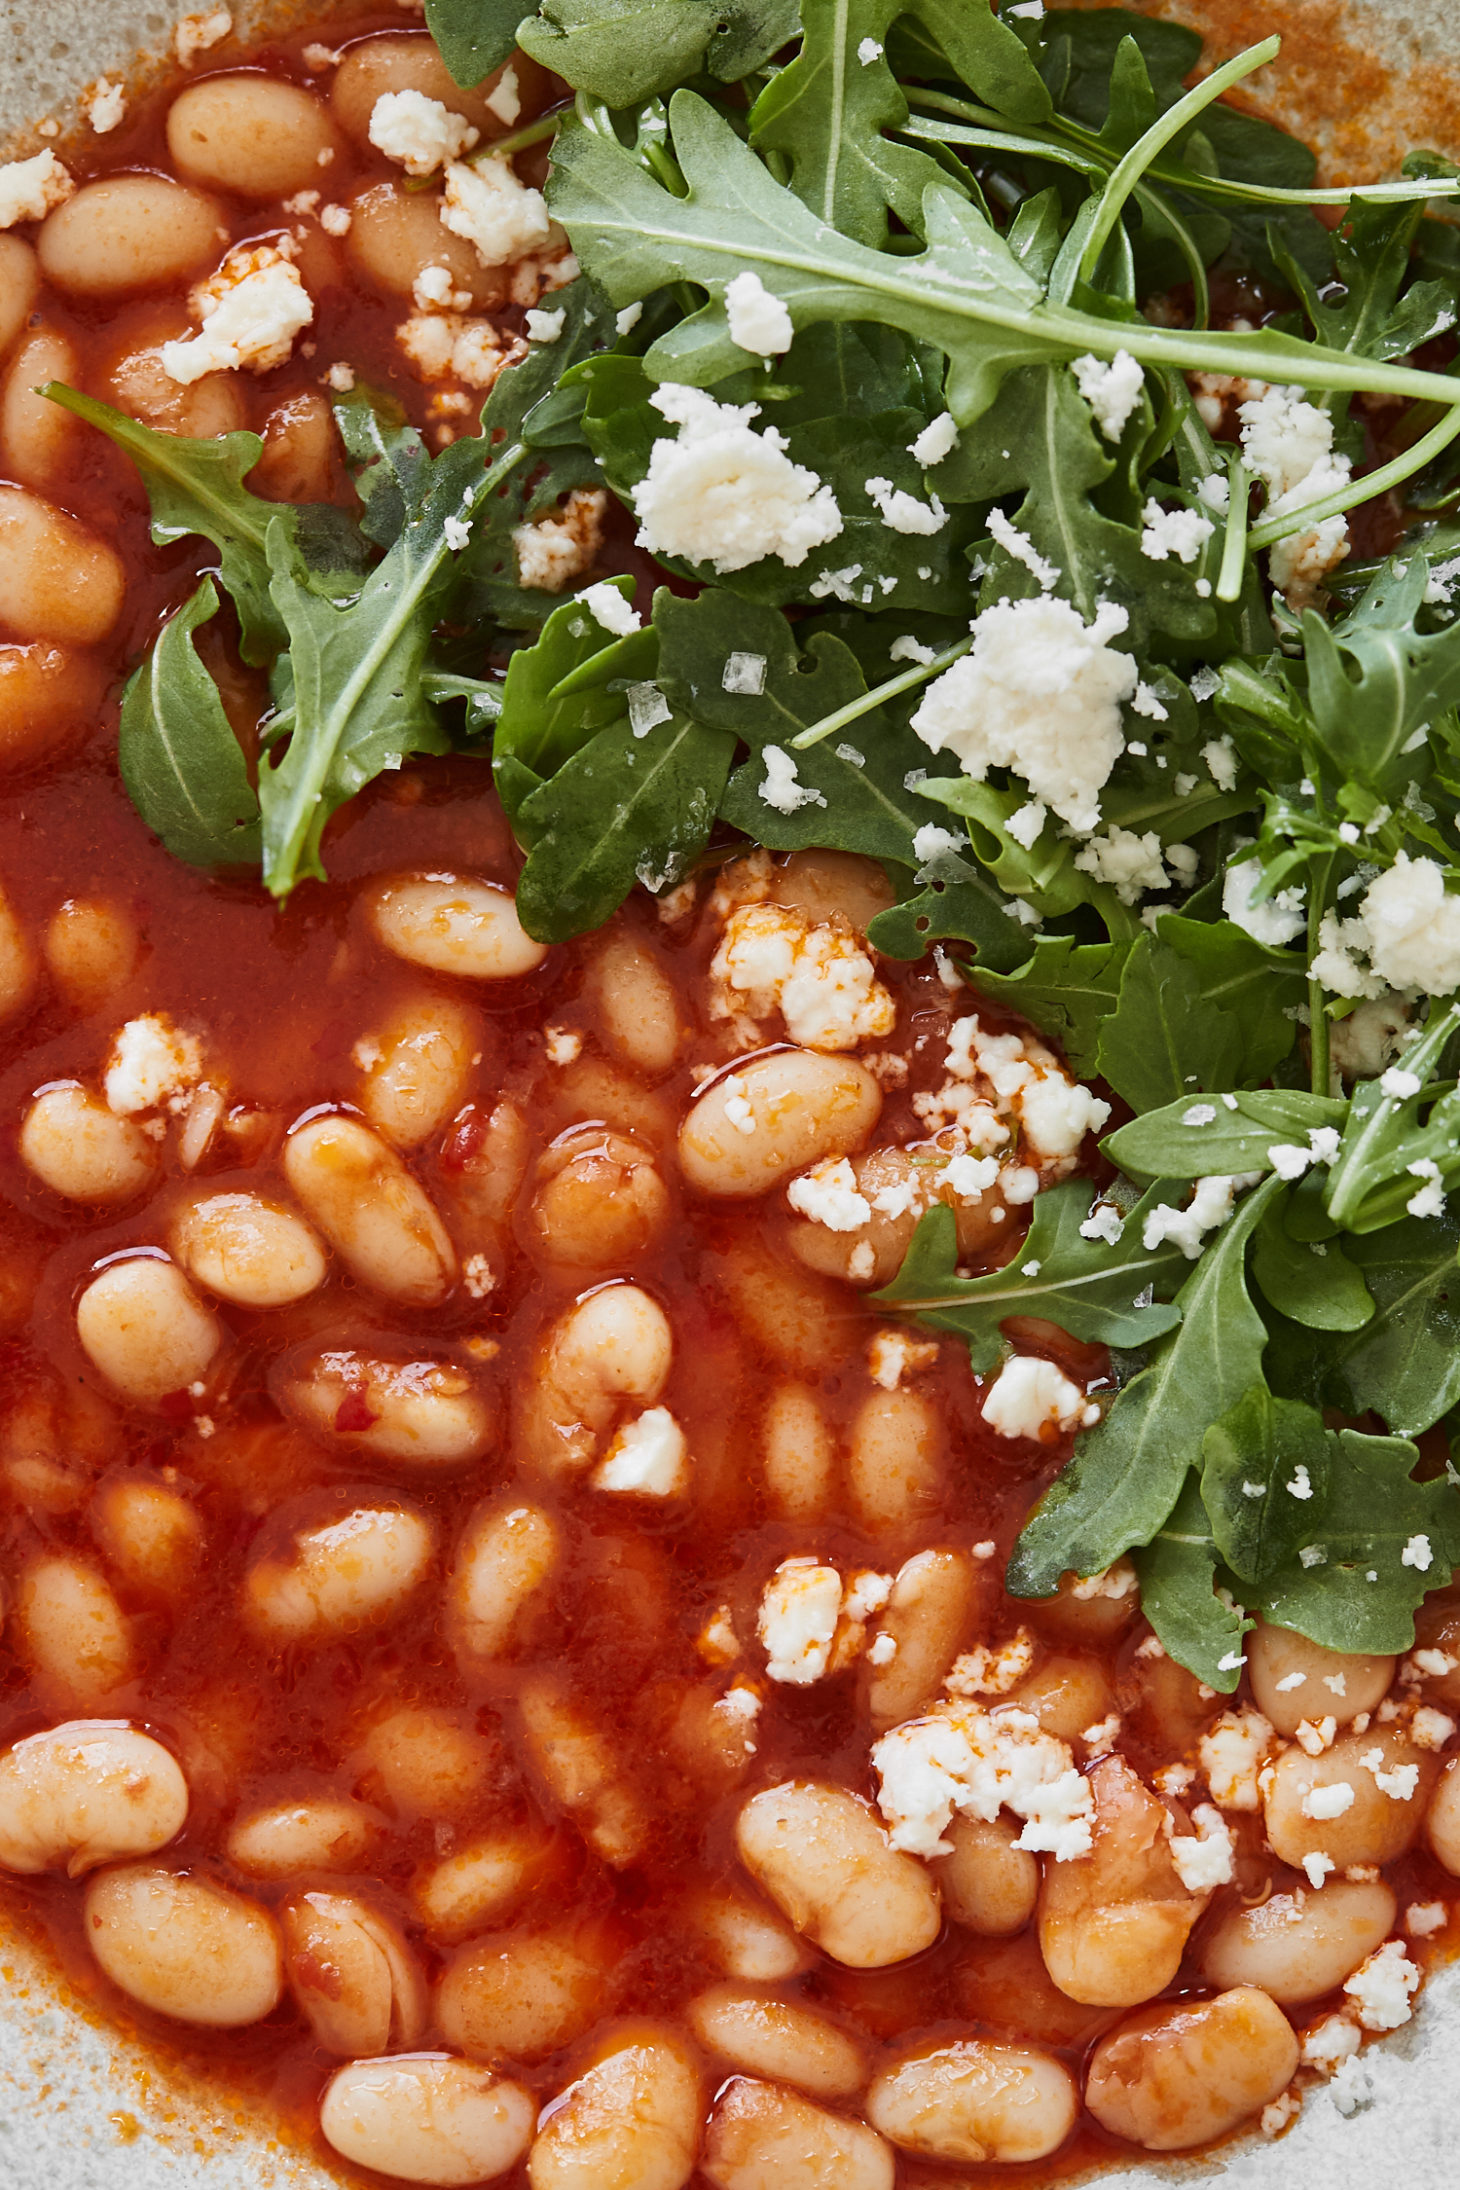 Close-up image of white beans in a tomato broth with arugula and feta on top.